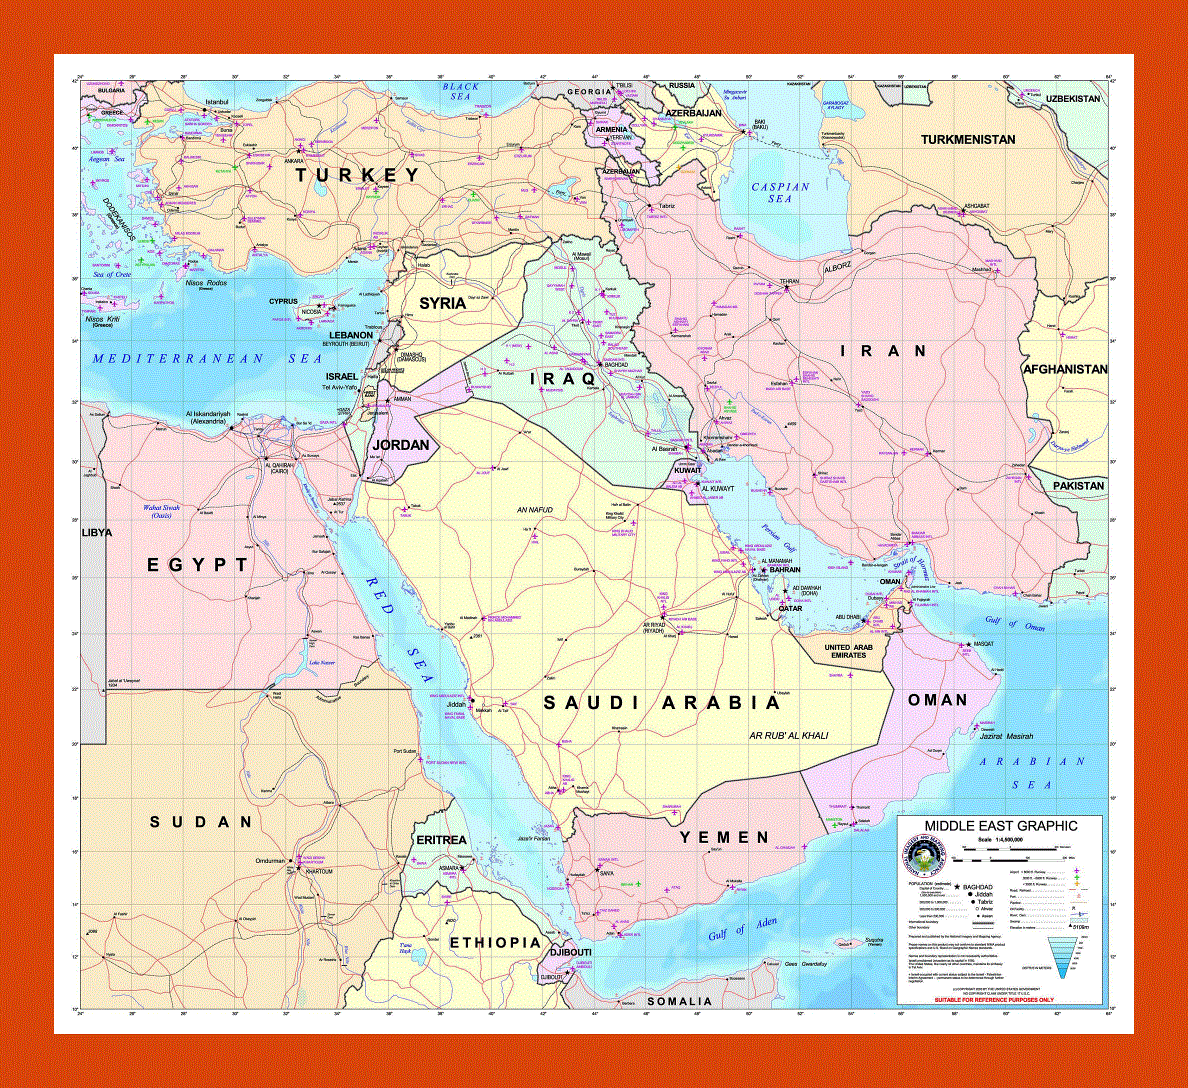 Graphic map of the Middle East - 2003